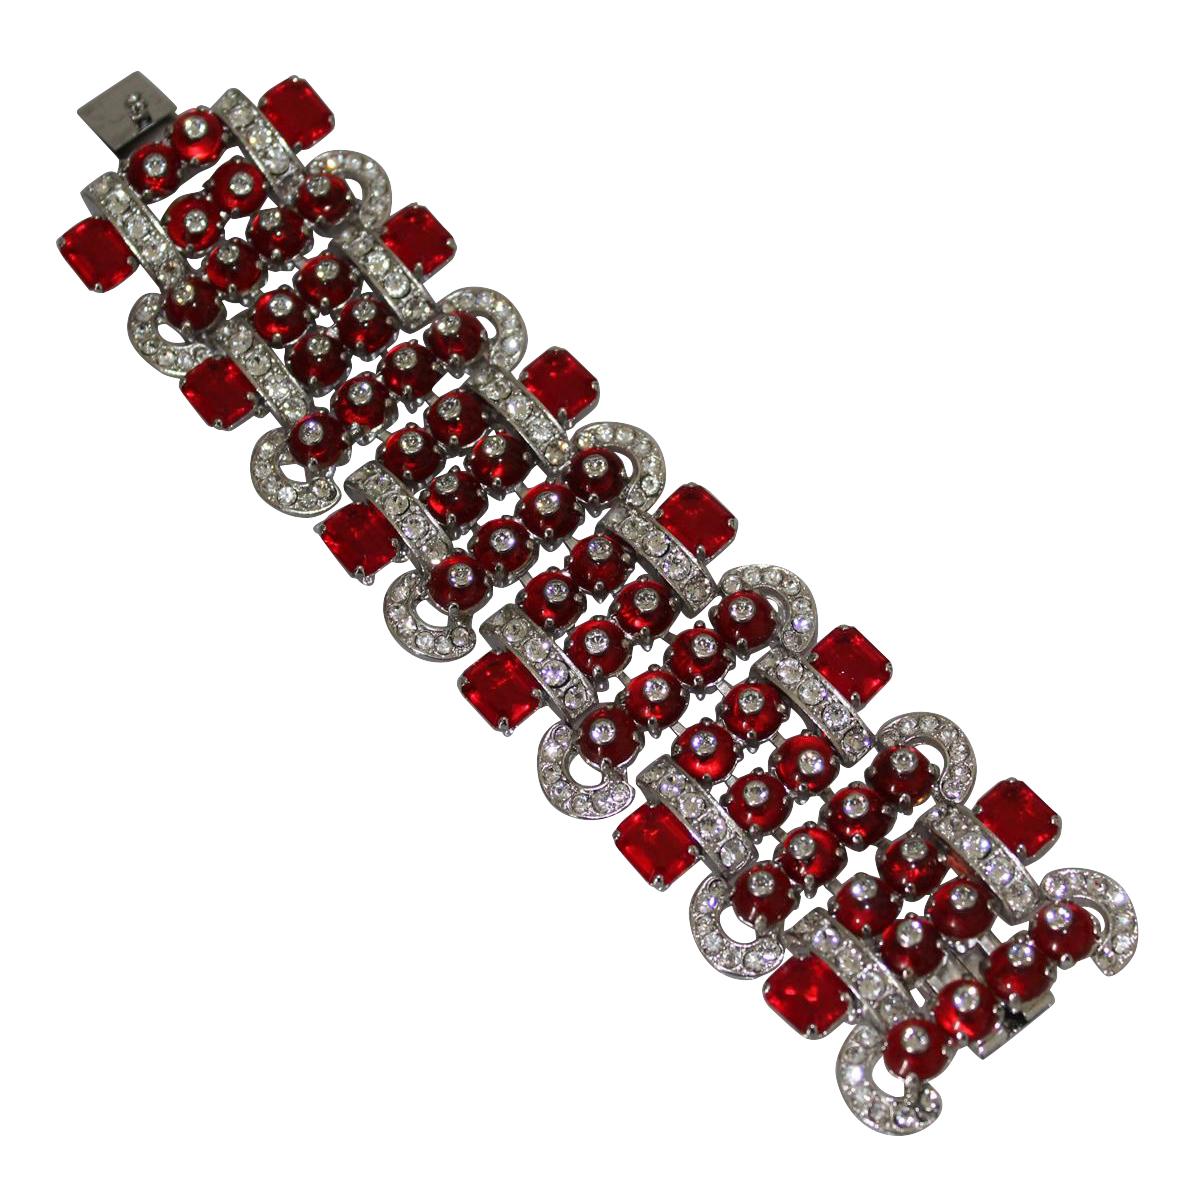 Fantastic masterpiece by Carlo Zini
One of the world greatest bijoux designers
Perfect for San Valentino !
Non allergenic rhodium
Amazing hand creation of Swarovski crystals
Ruby like stones and resins
Wrist size cm 16 (6.29 inches)
Worldwide